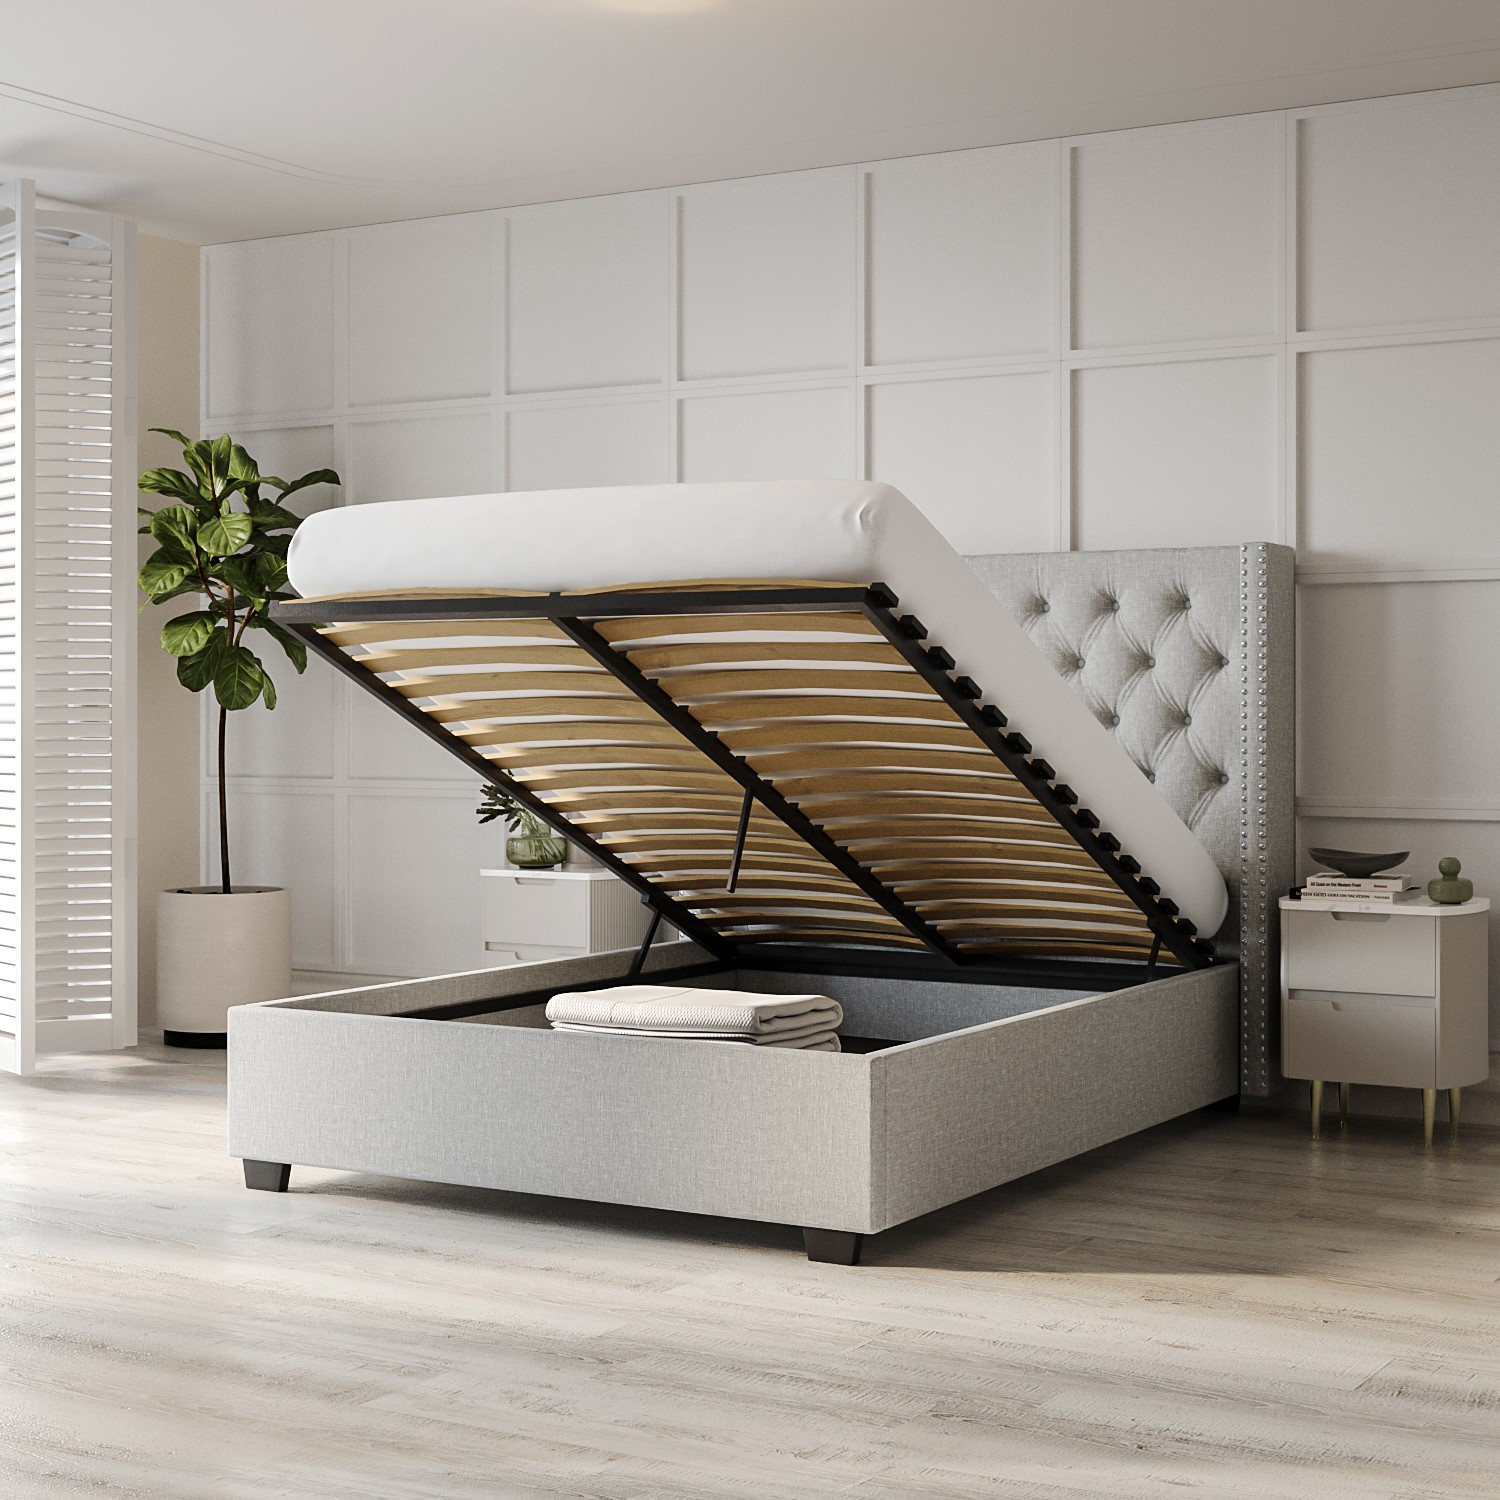 Read more about Light grey fabric double ottoman bed with winged headboard maeva